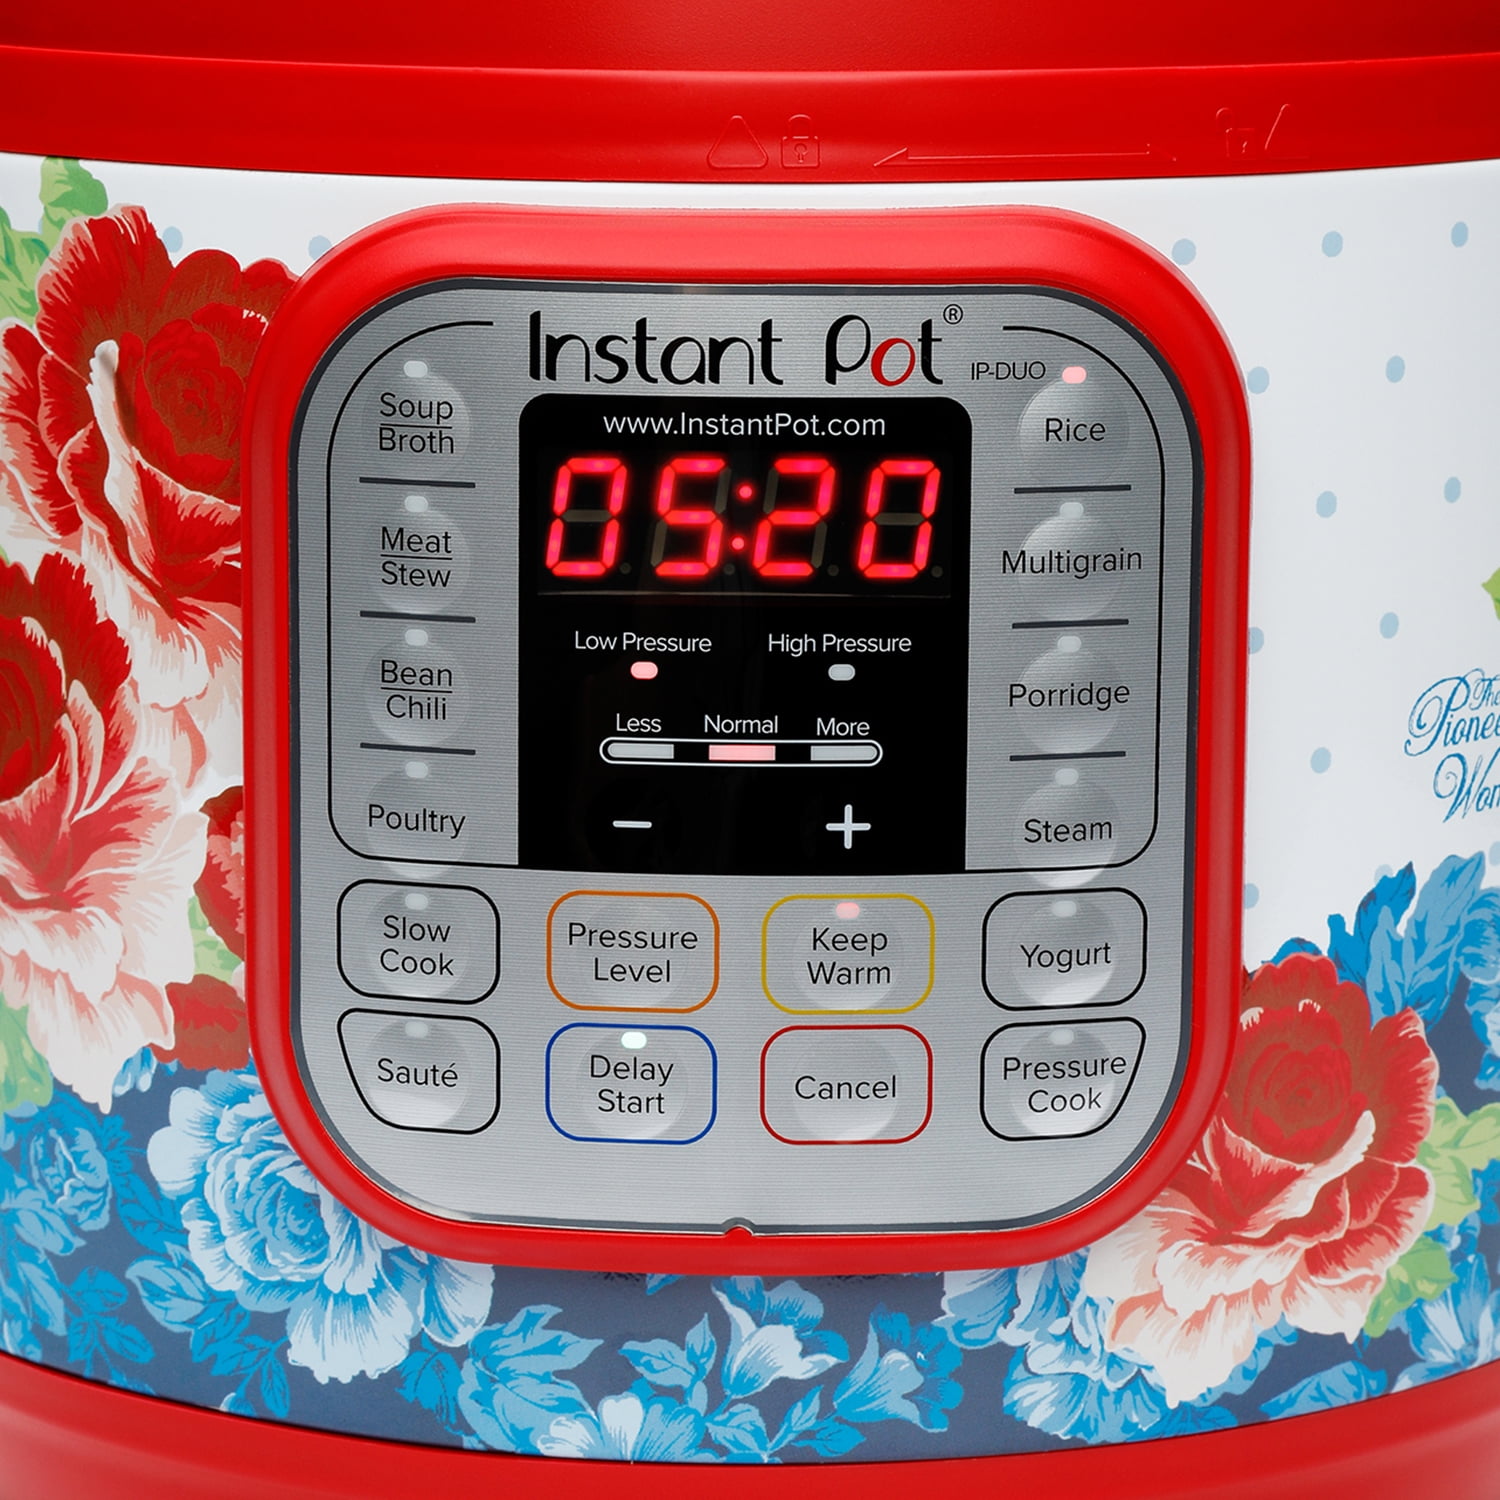 The Pioneer Woman launched 2 new floral Instant Pots at Walmart